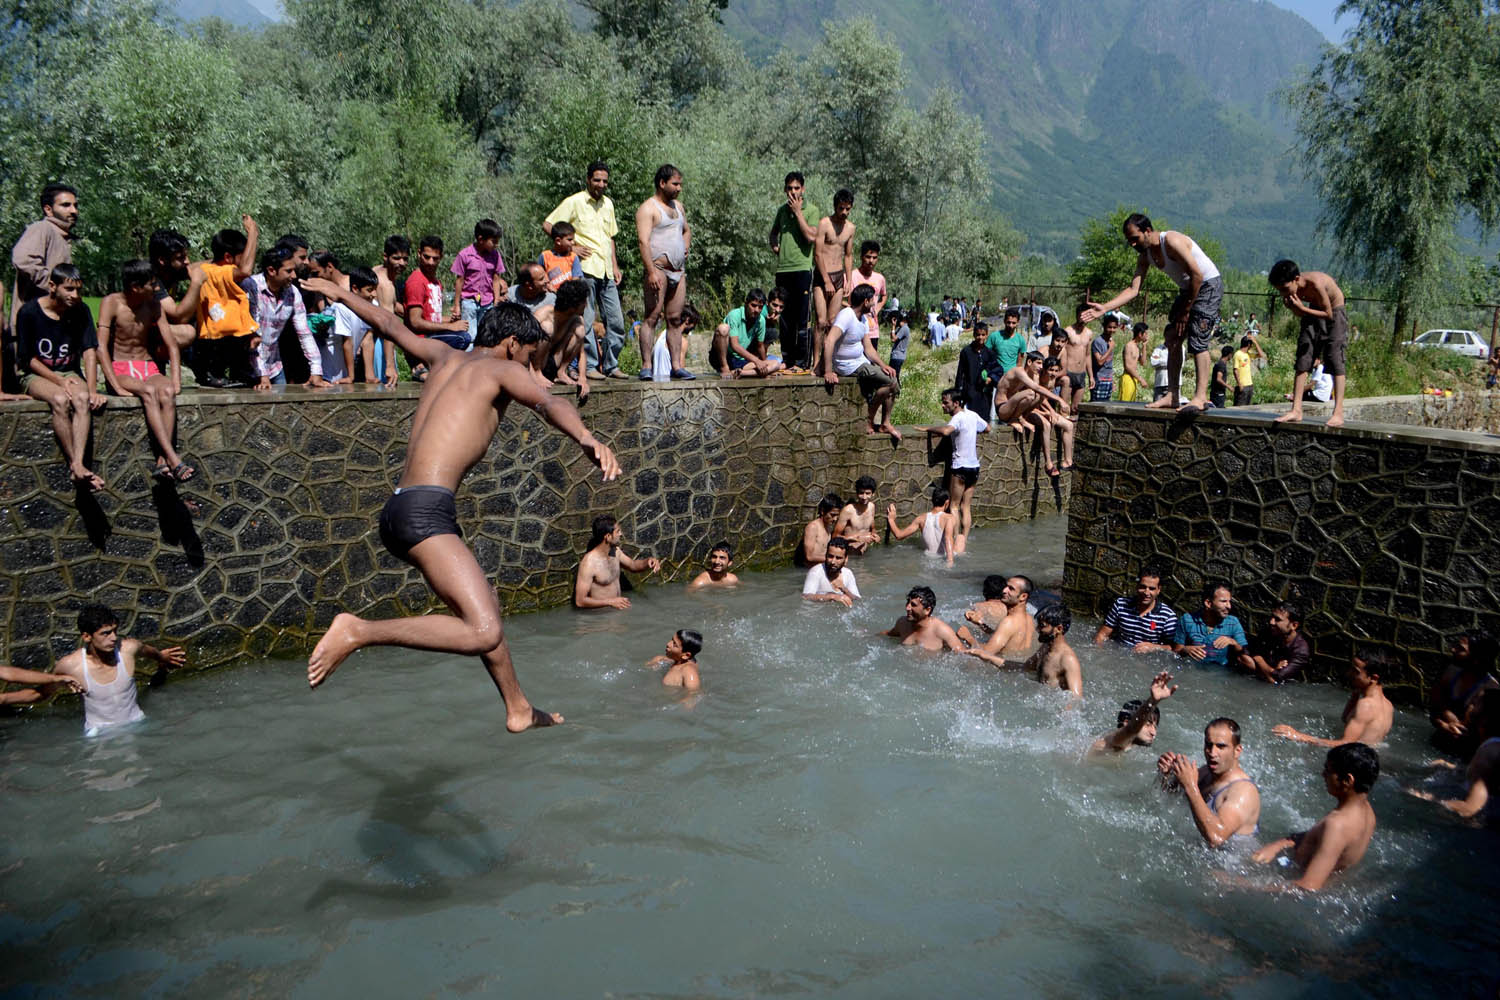 July 14, 2013. A Kashmiri Muslim boy jumps in a spring during a hot Ramadan day in the outskirts of Srinagar as Kashmir Valley undergoes a heat wave during the holy month.